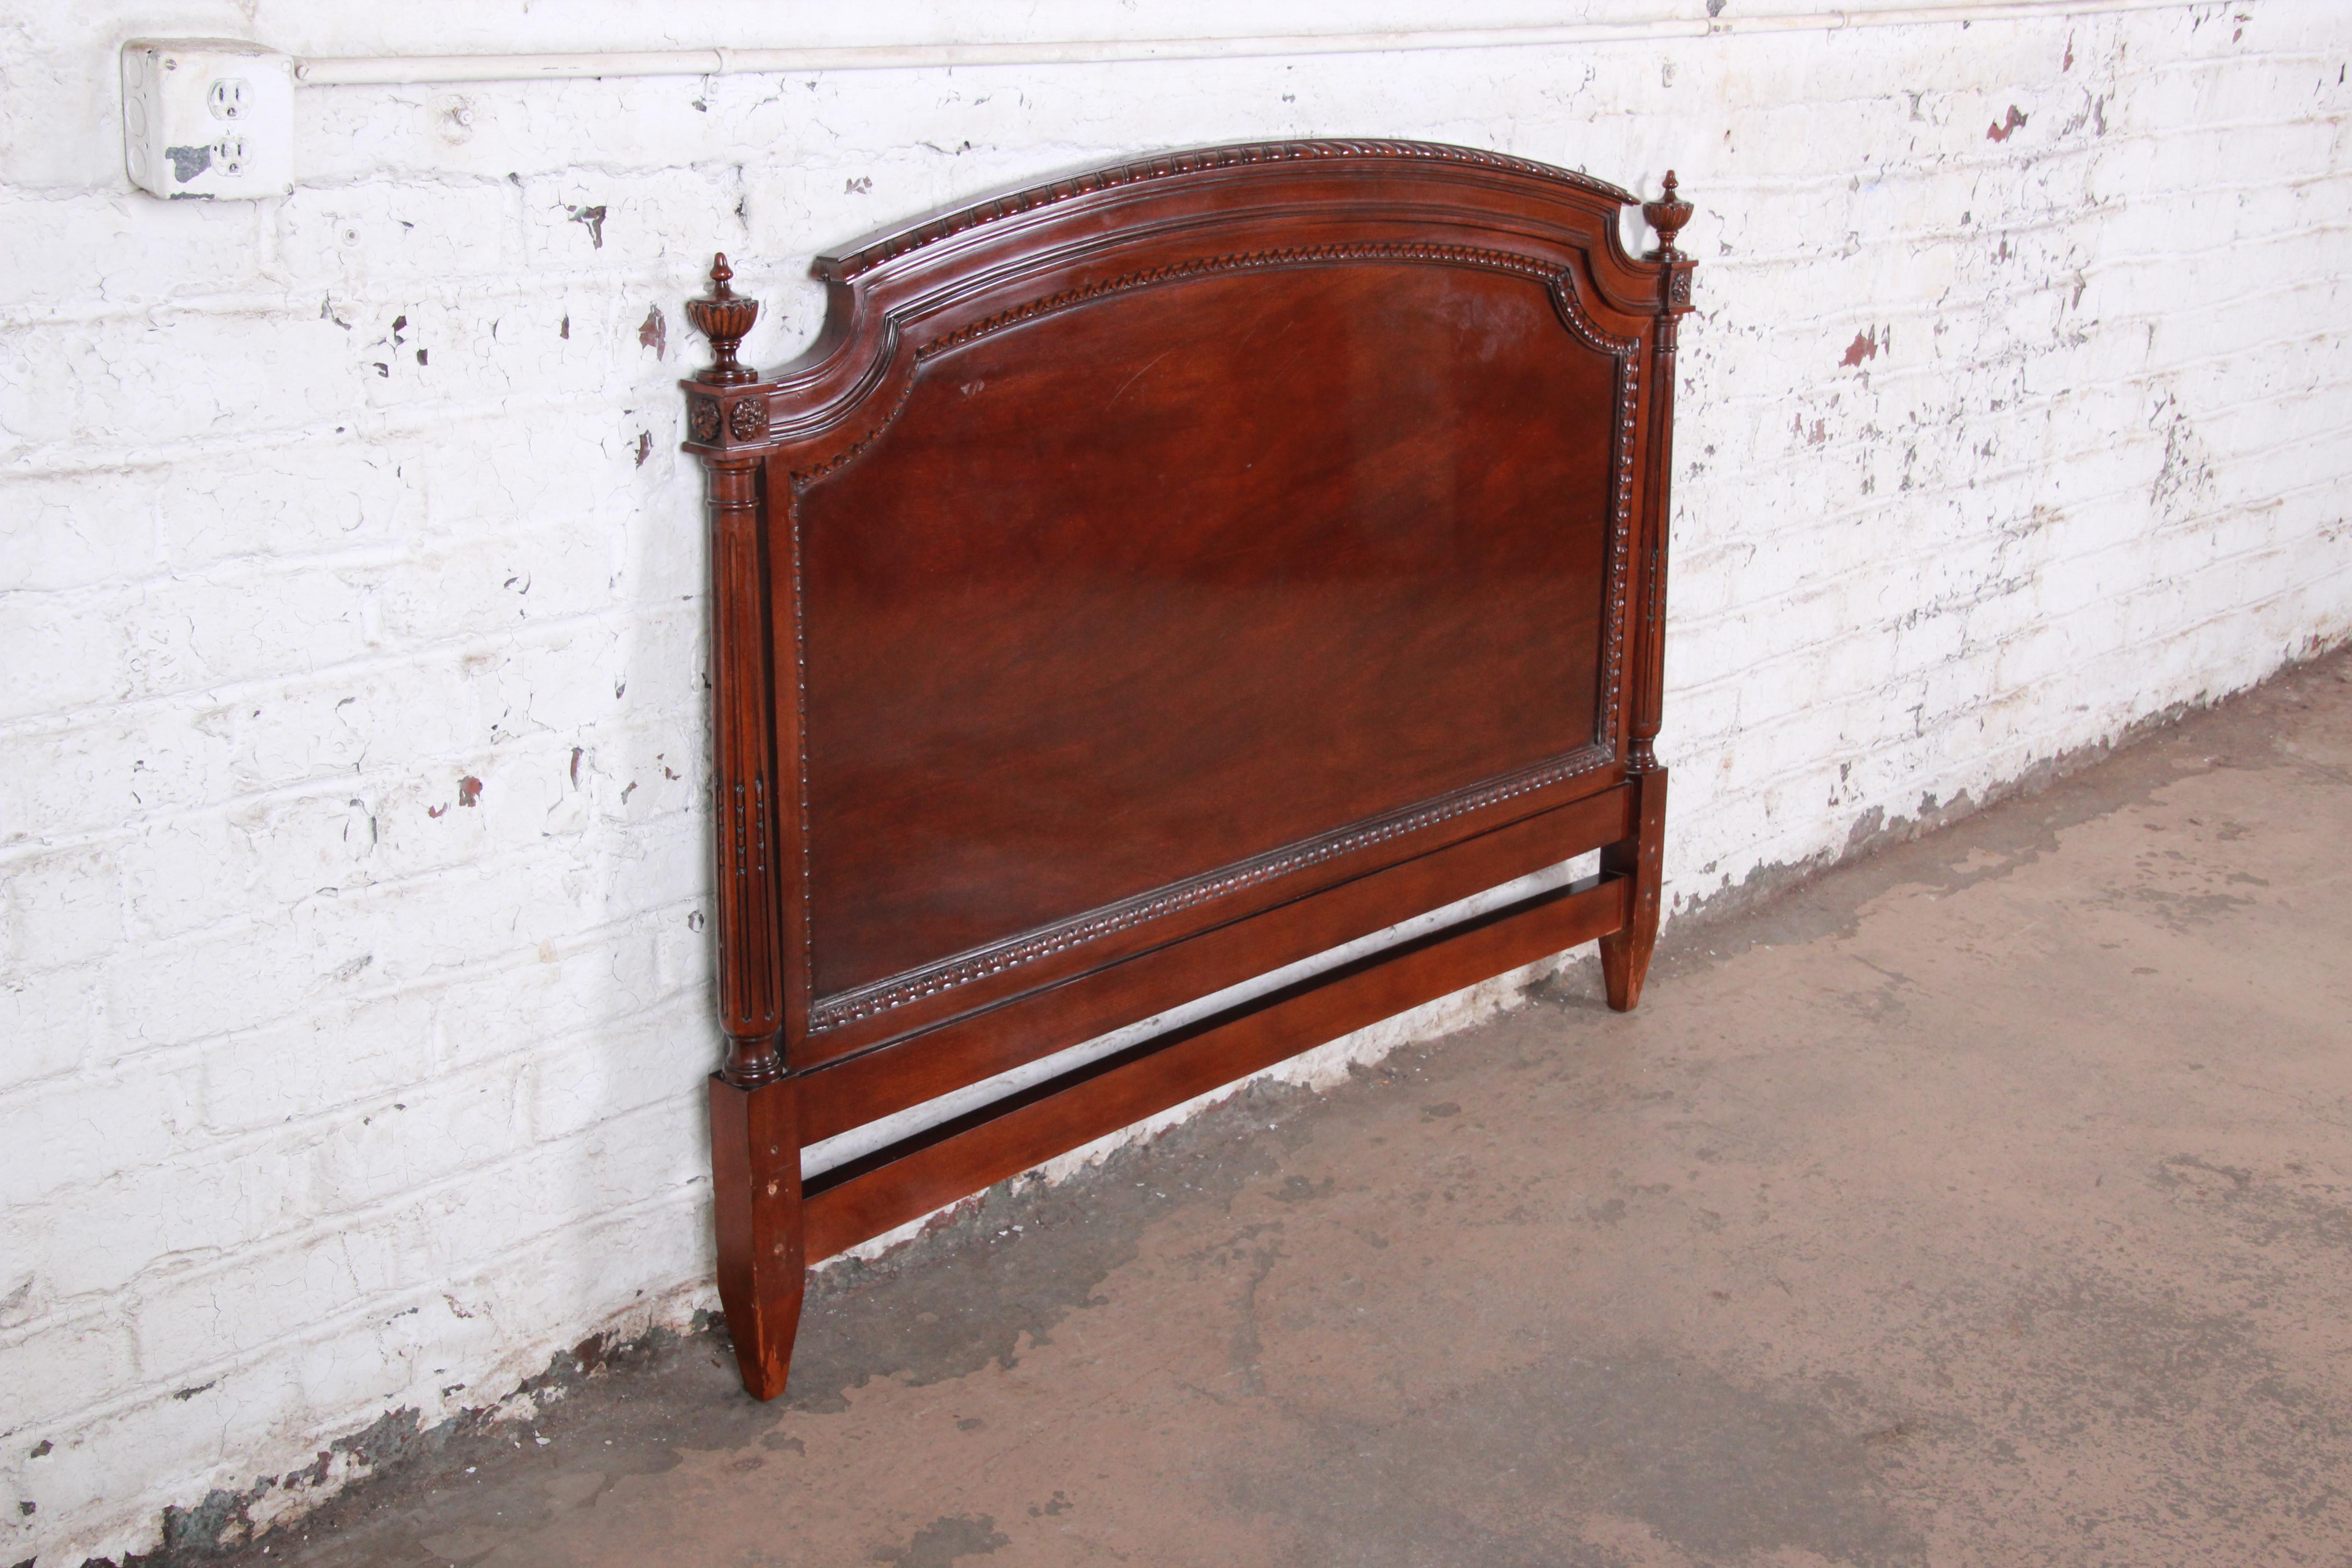 A gorgeous carved mahogany queen size headboard by Karges. The headboard features stunning mahogany wood grain with elegant carved details and a nice traditional style. Made with the highest level of craftsmanship and quality as expected from